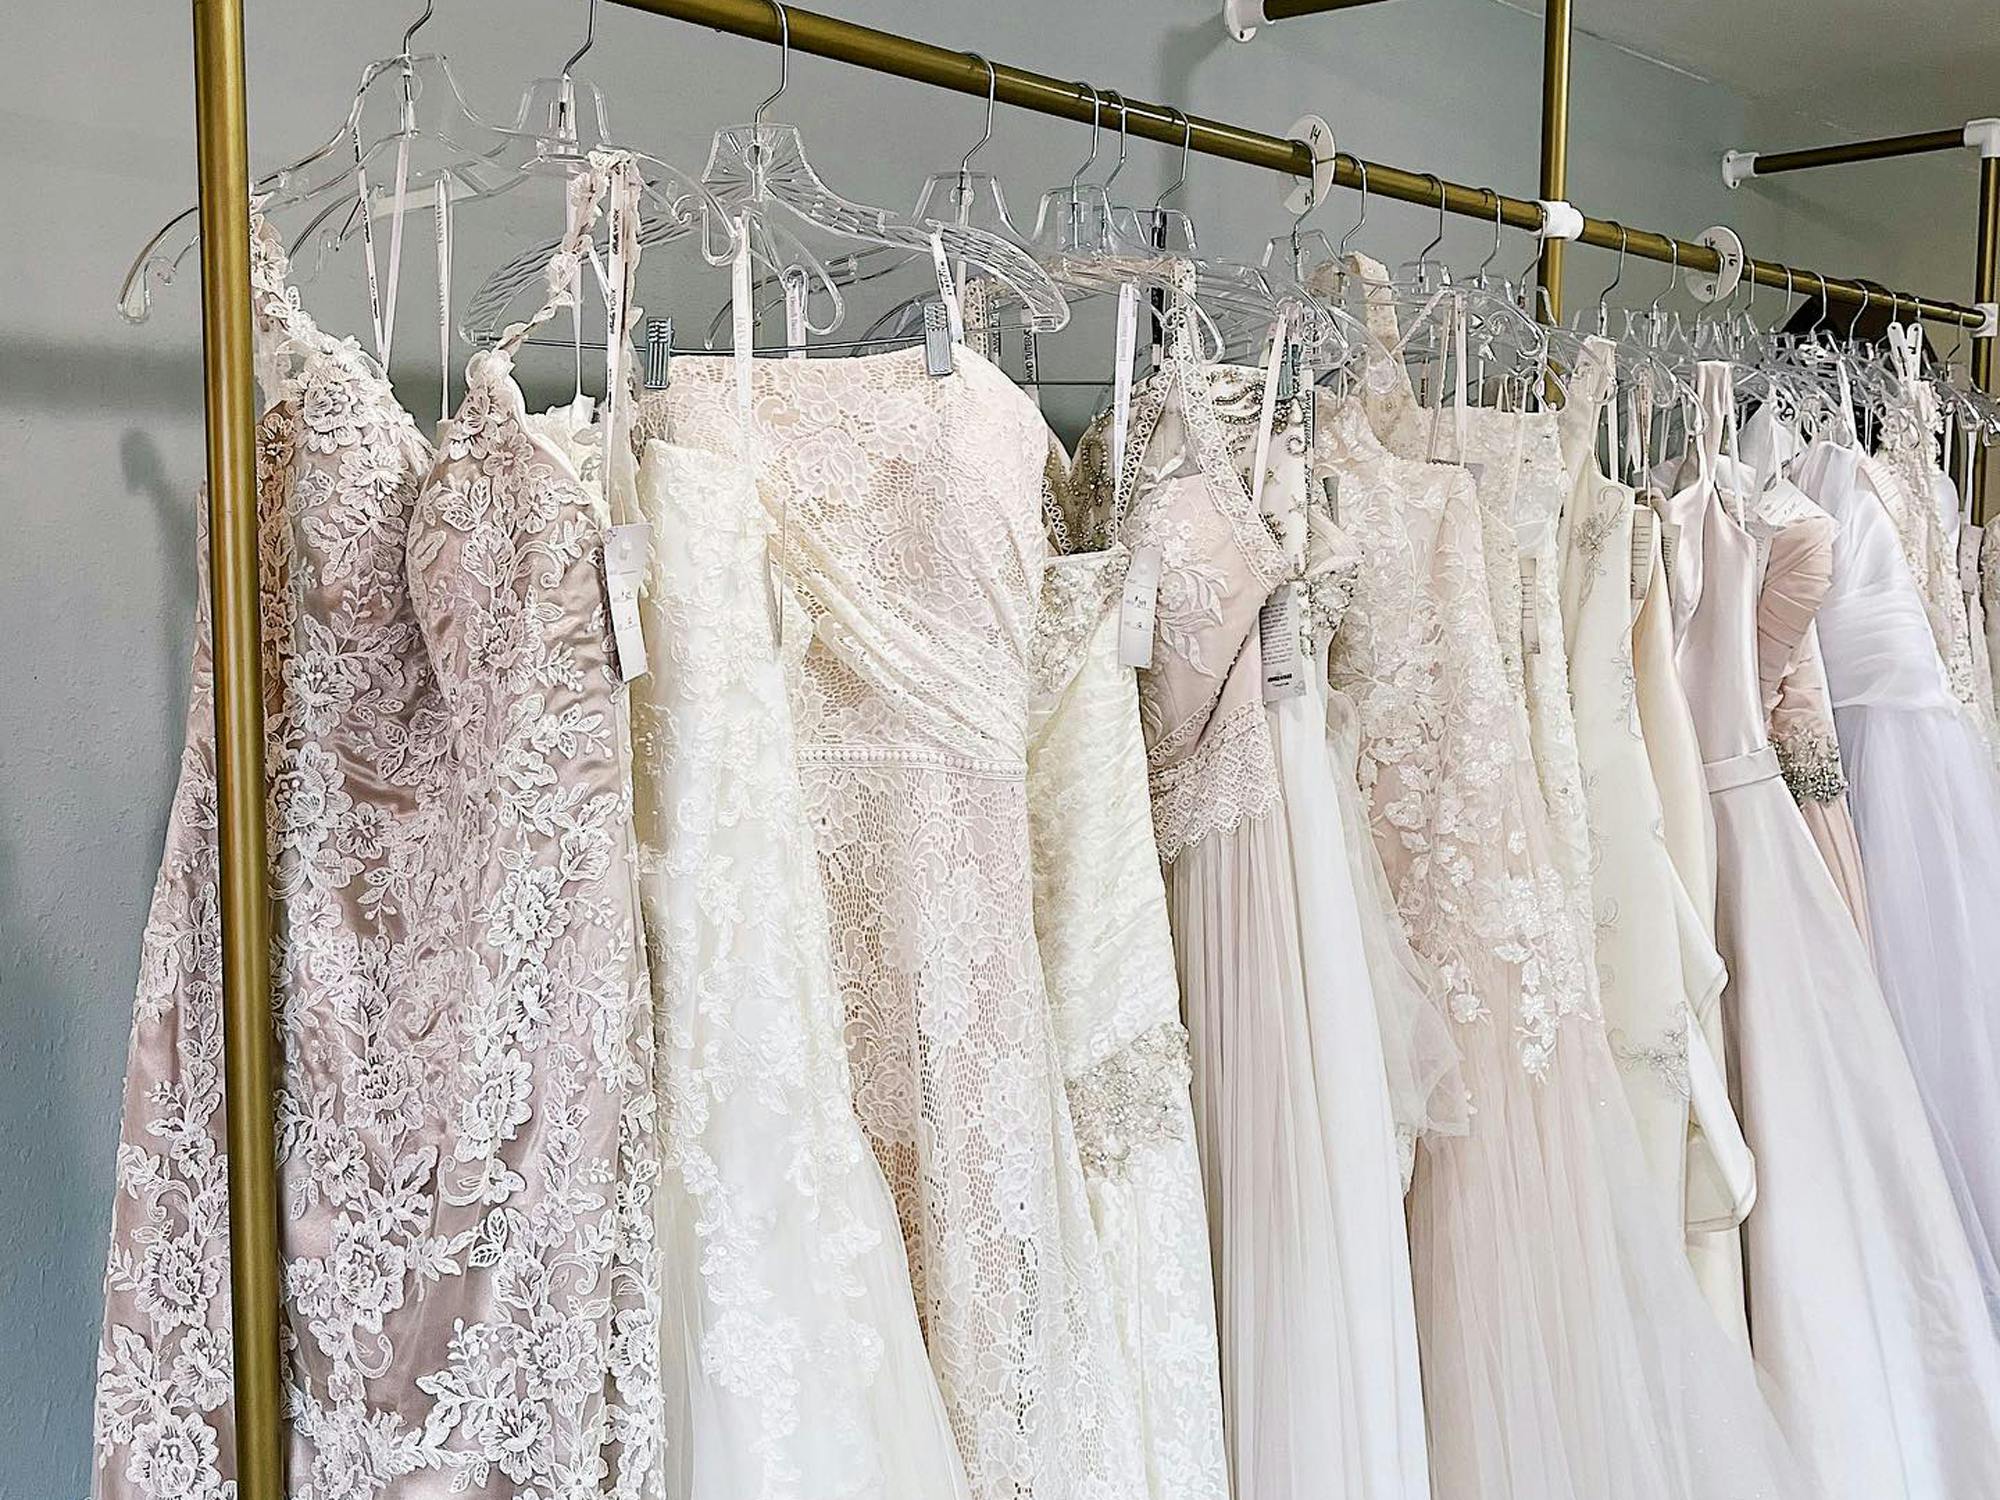 How to Consign or Sell Your Wedding Dress  Southern Weddings  Consignment  wedding dresses Seattle wedding dress Sell your wedding dress